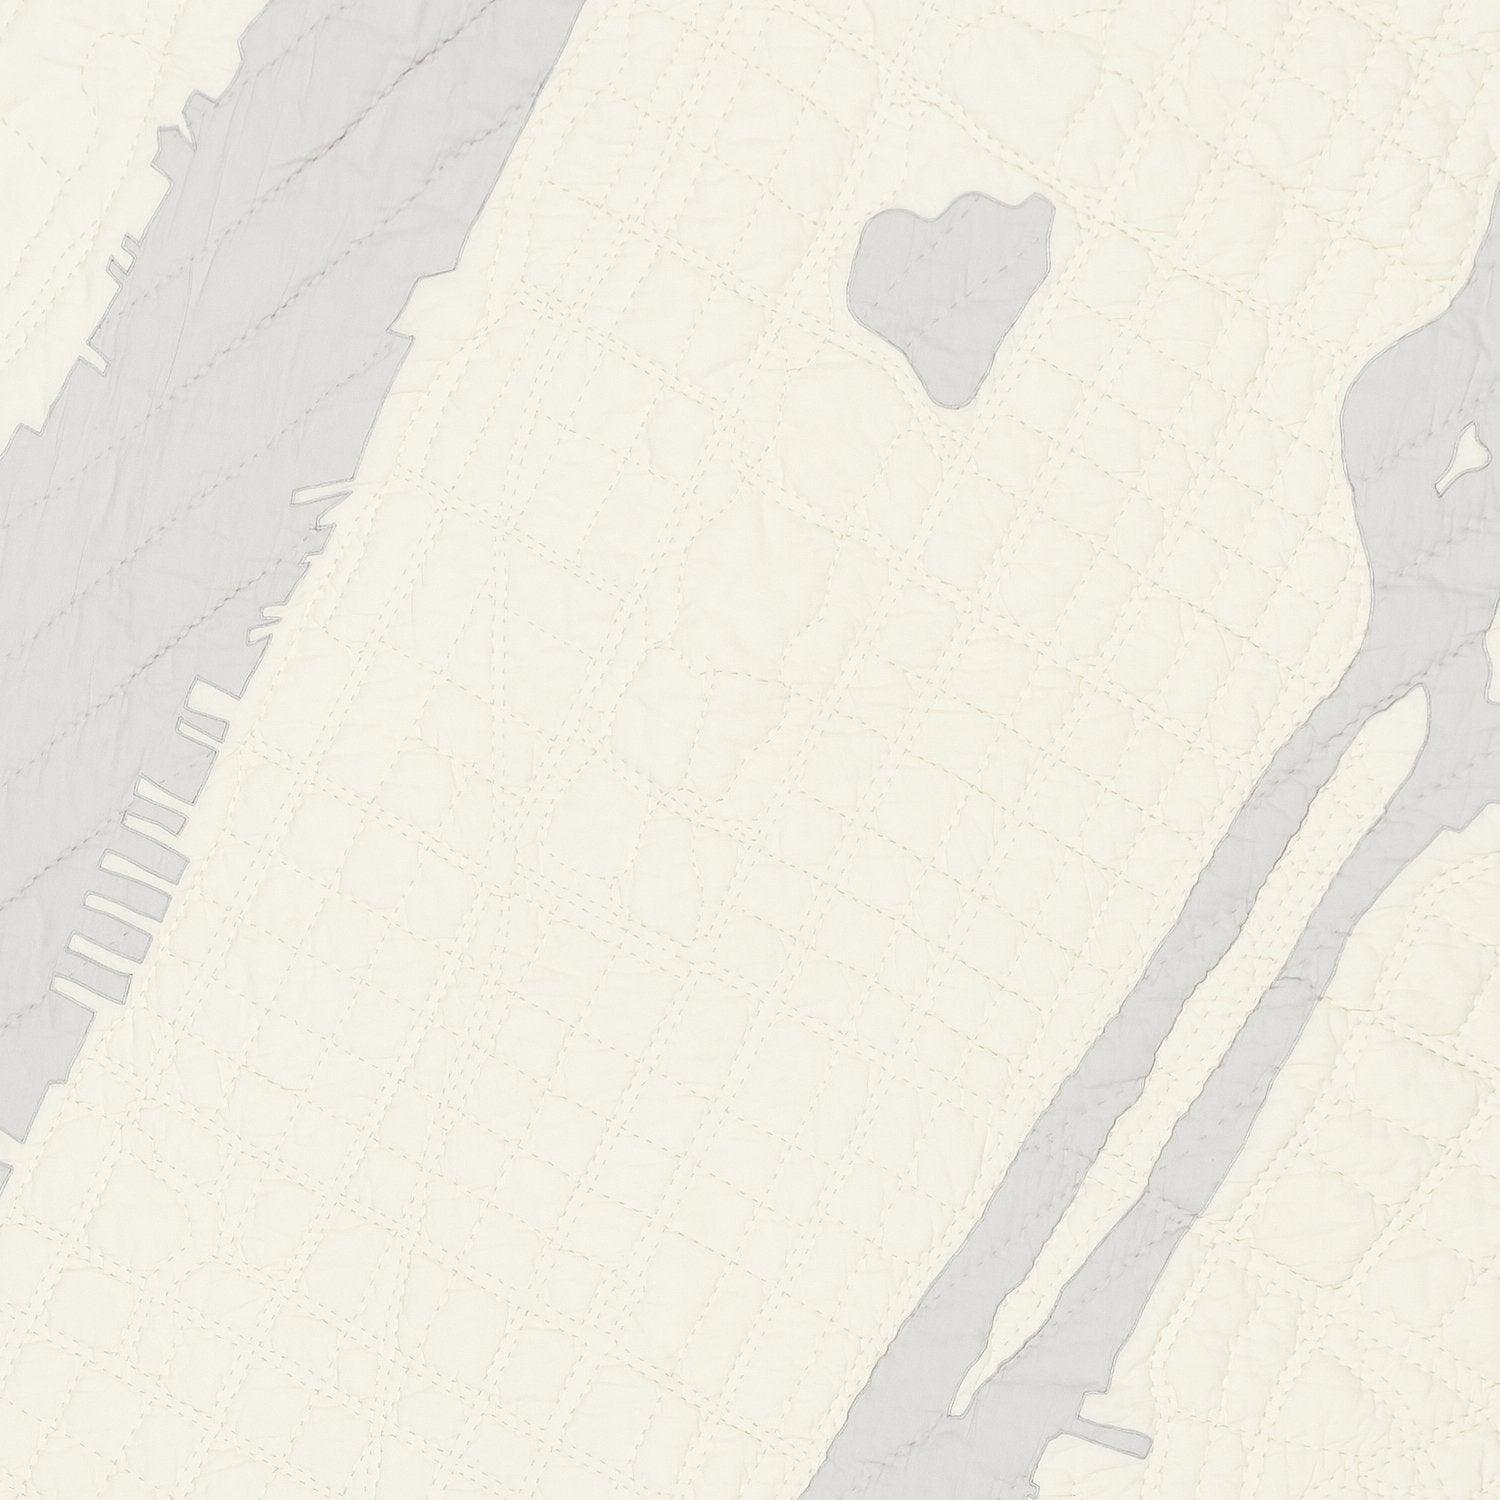 Detail of heirloom quilt, a hand-stitched map of New York City's Central Park reservoir, Hudson River, Roosevelt Island, East River, and surrounding streets with ivory land and gray water.